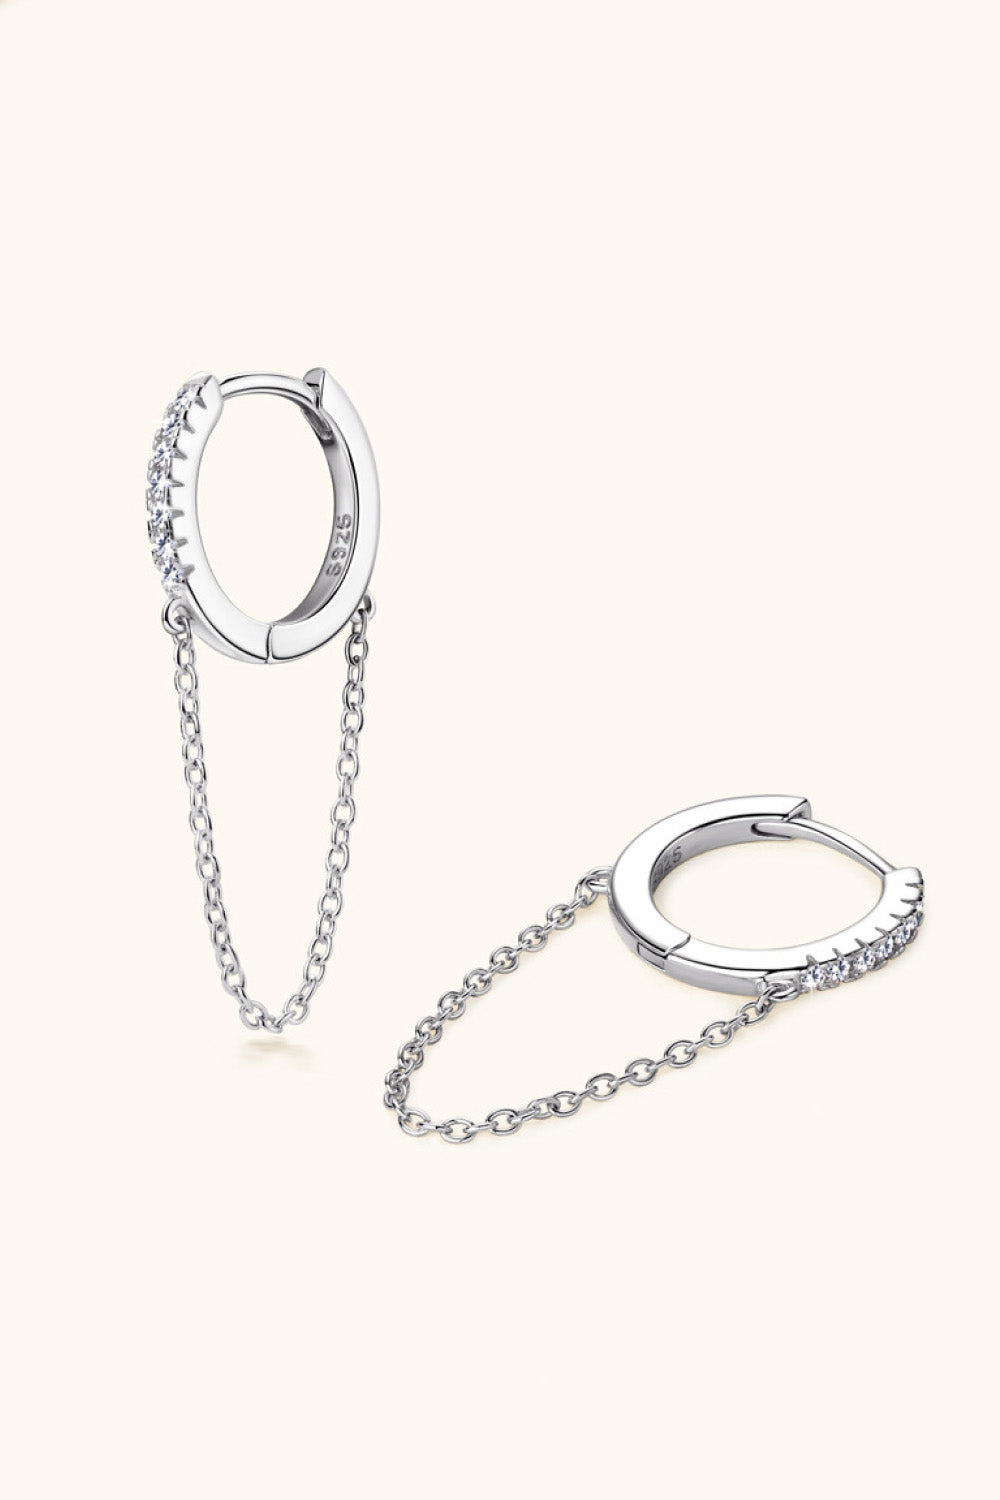 .112 Carat Moissanite 925 Sterling Silver Huggie Earrings with Chain